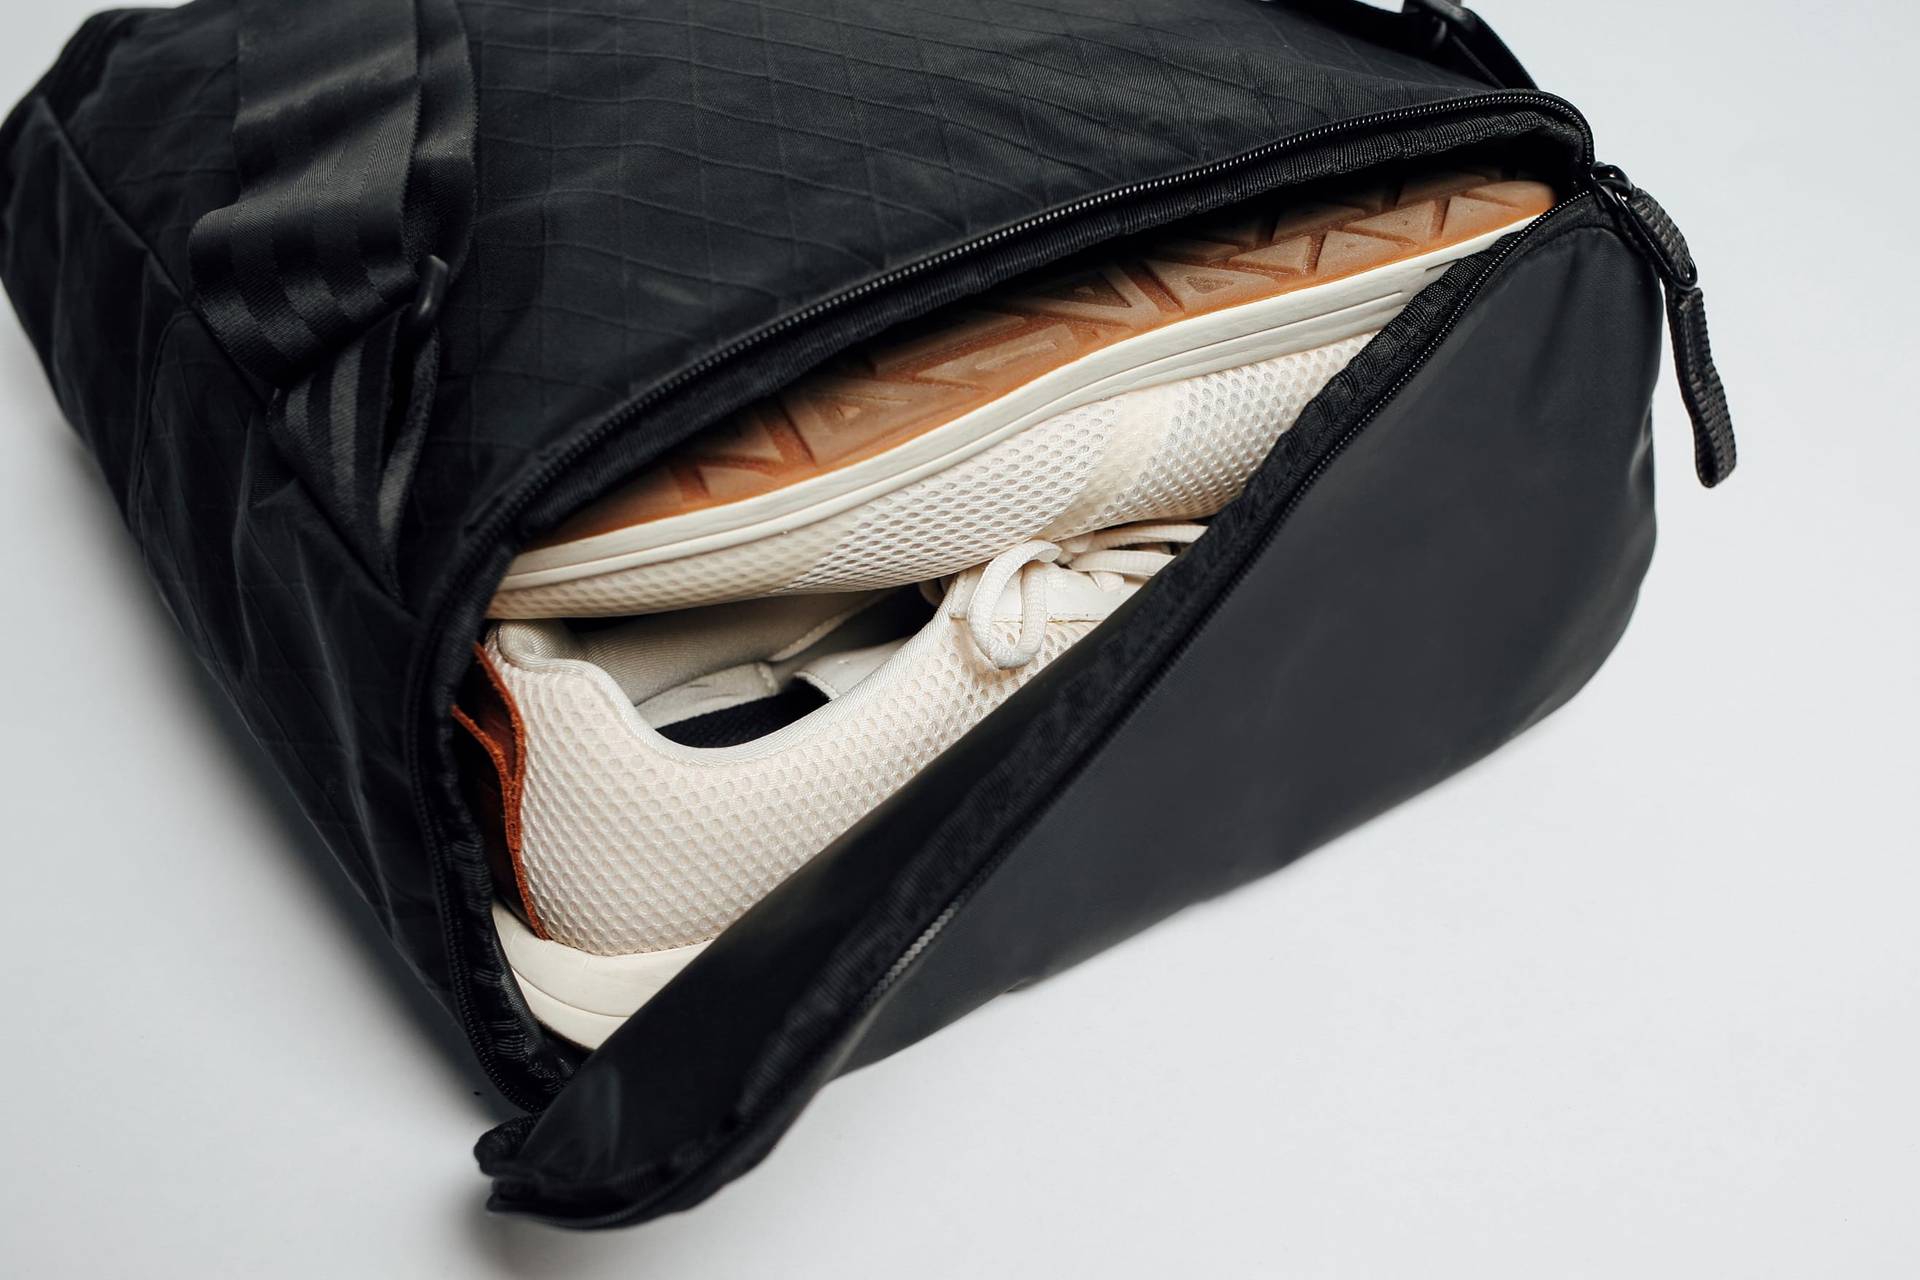 Water Resistant Shoe / Dirty Clothes Compartment